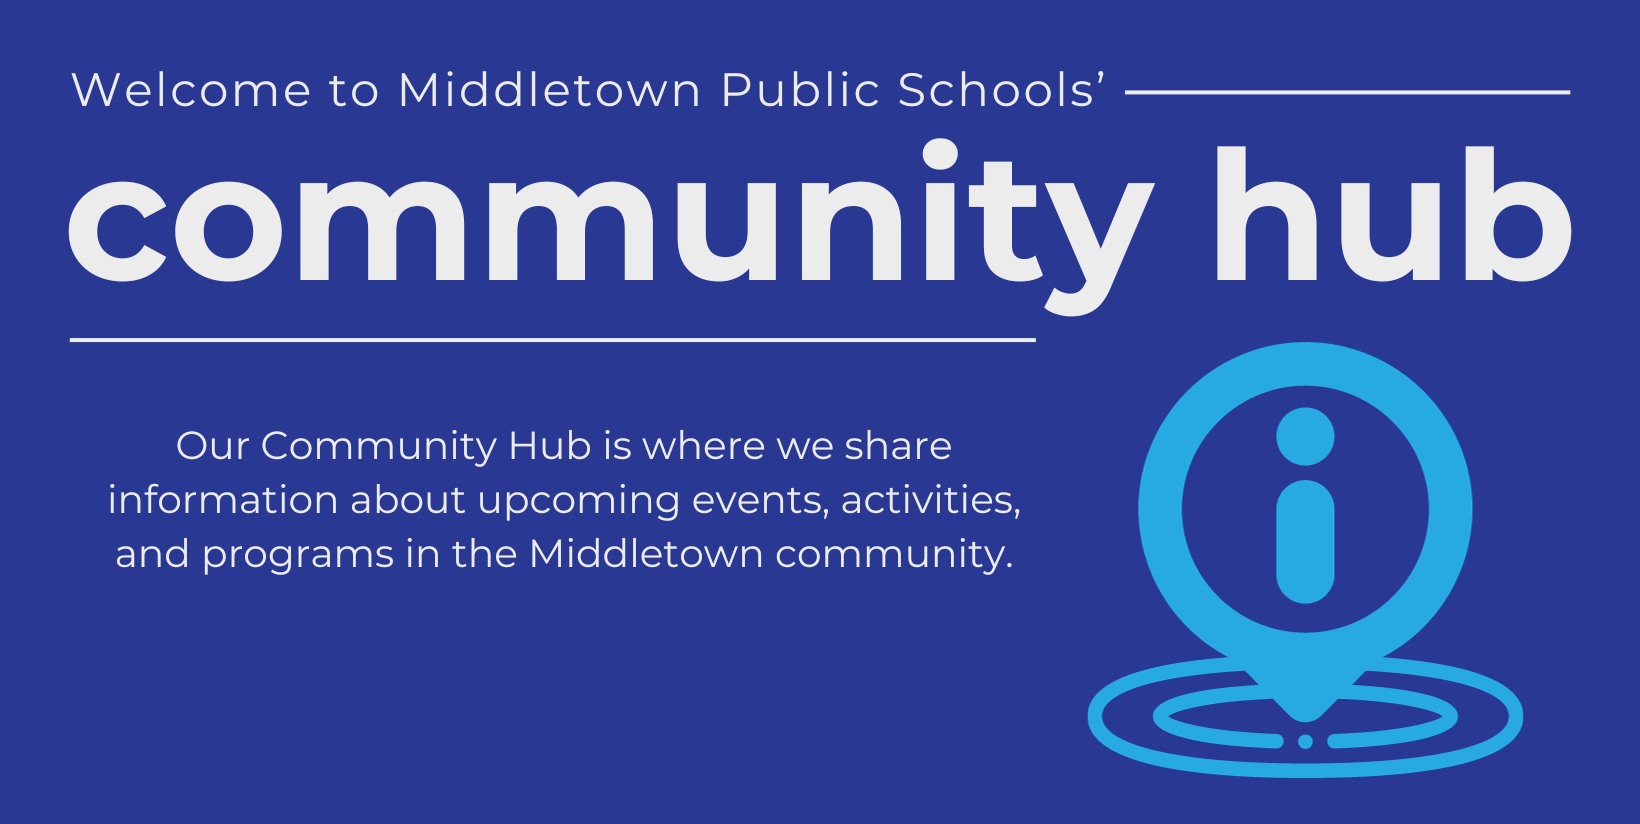 Our Community Hub is where we share information about upcoming events, activities, and programs in the Middletown community.